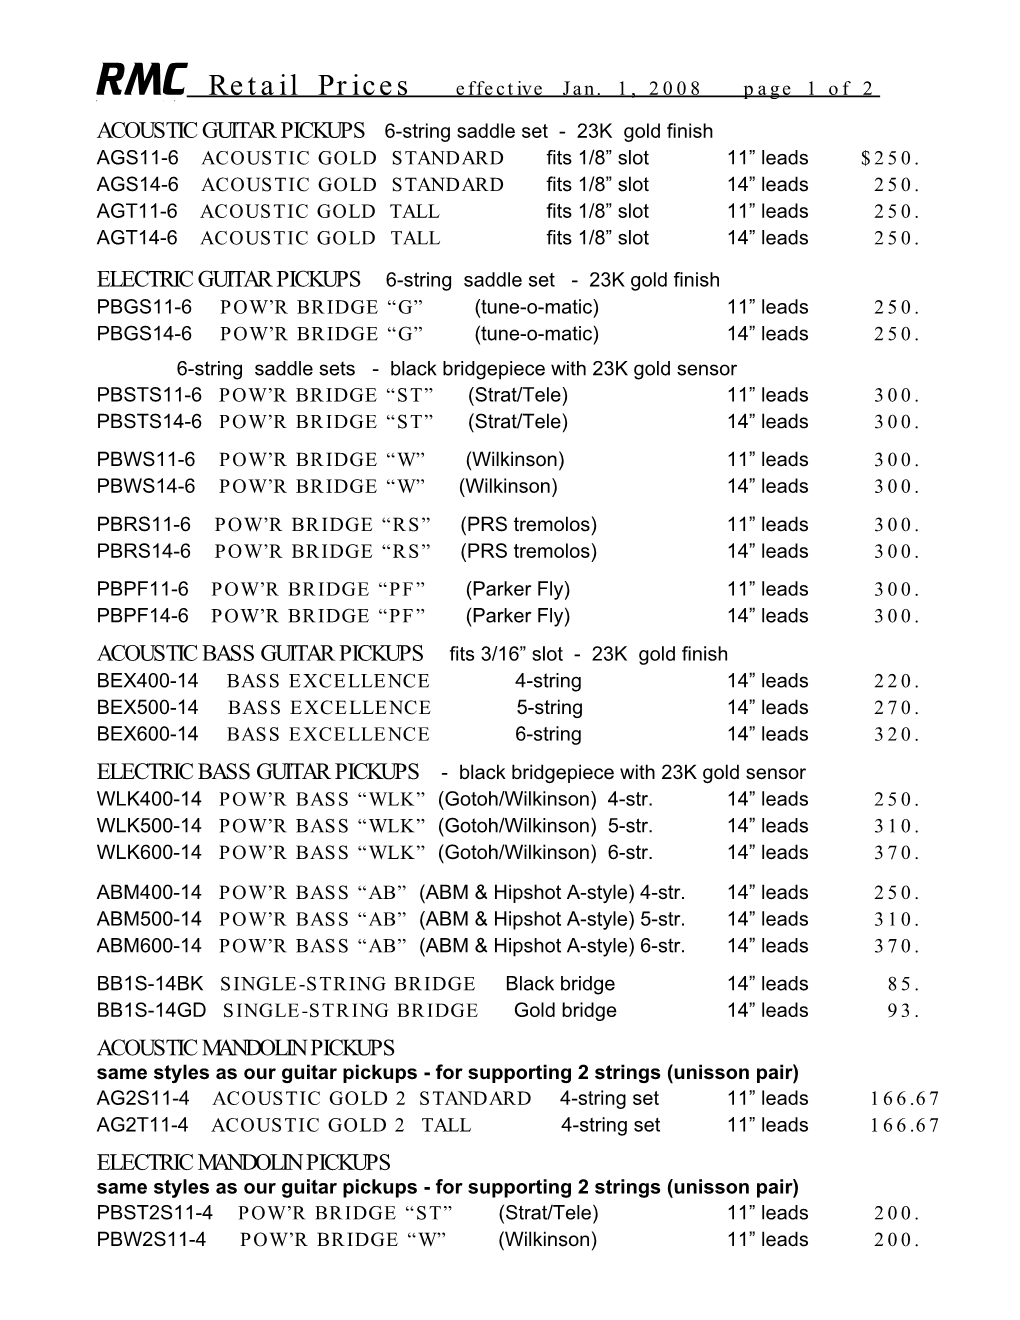 Retail Prices Effective Jan. 1, 2008 Page 1 of 2